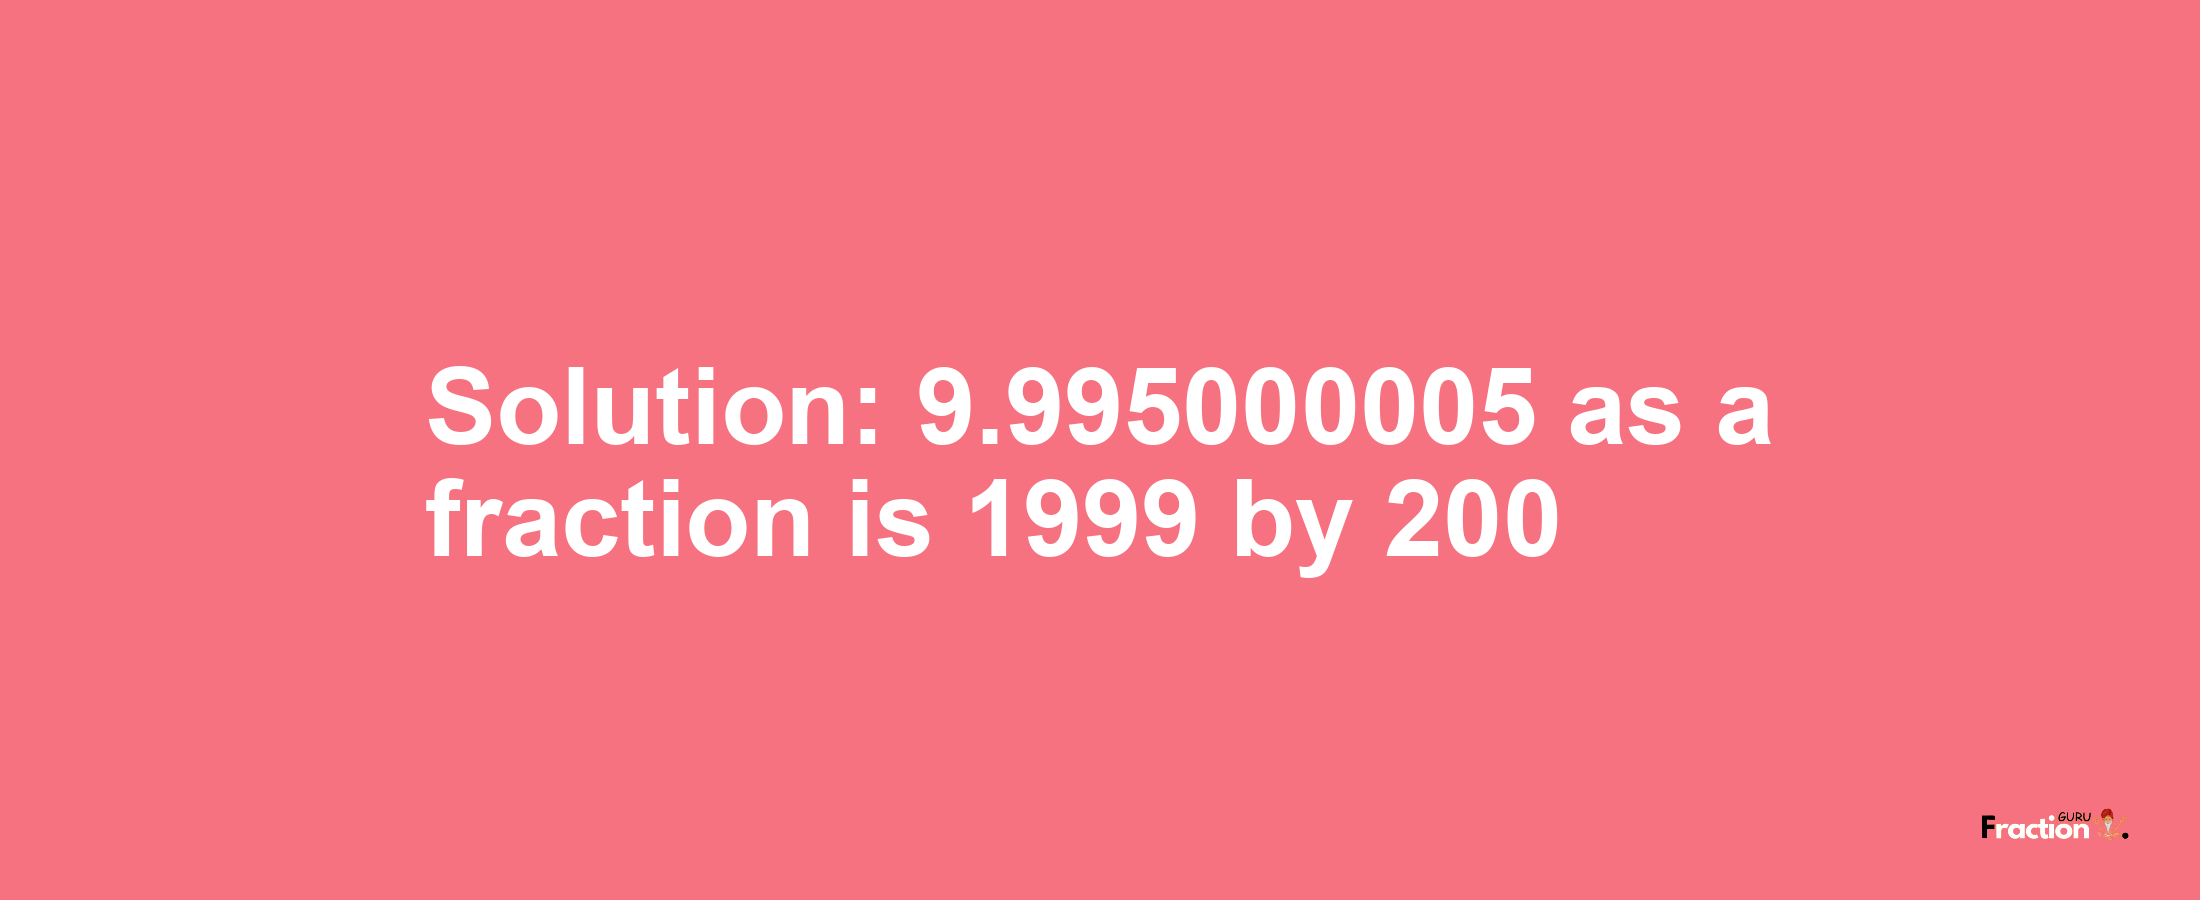 Solution:9.995000005 as a fraction is 1999/200